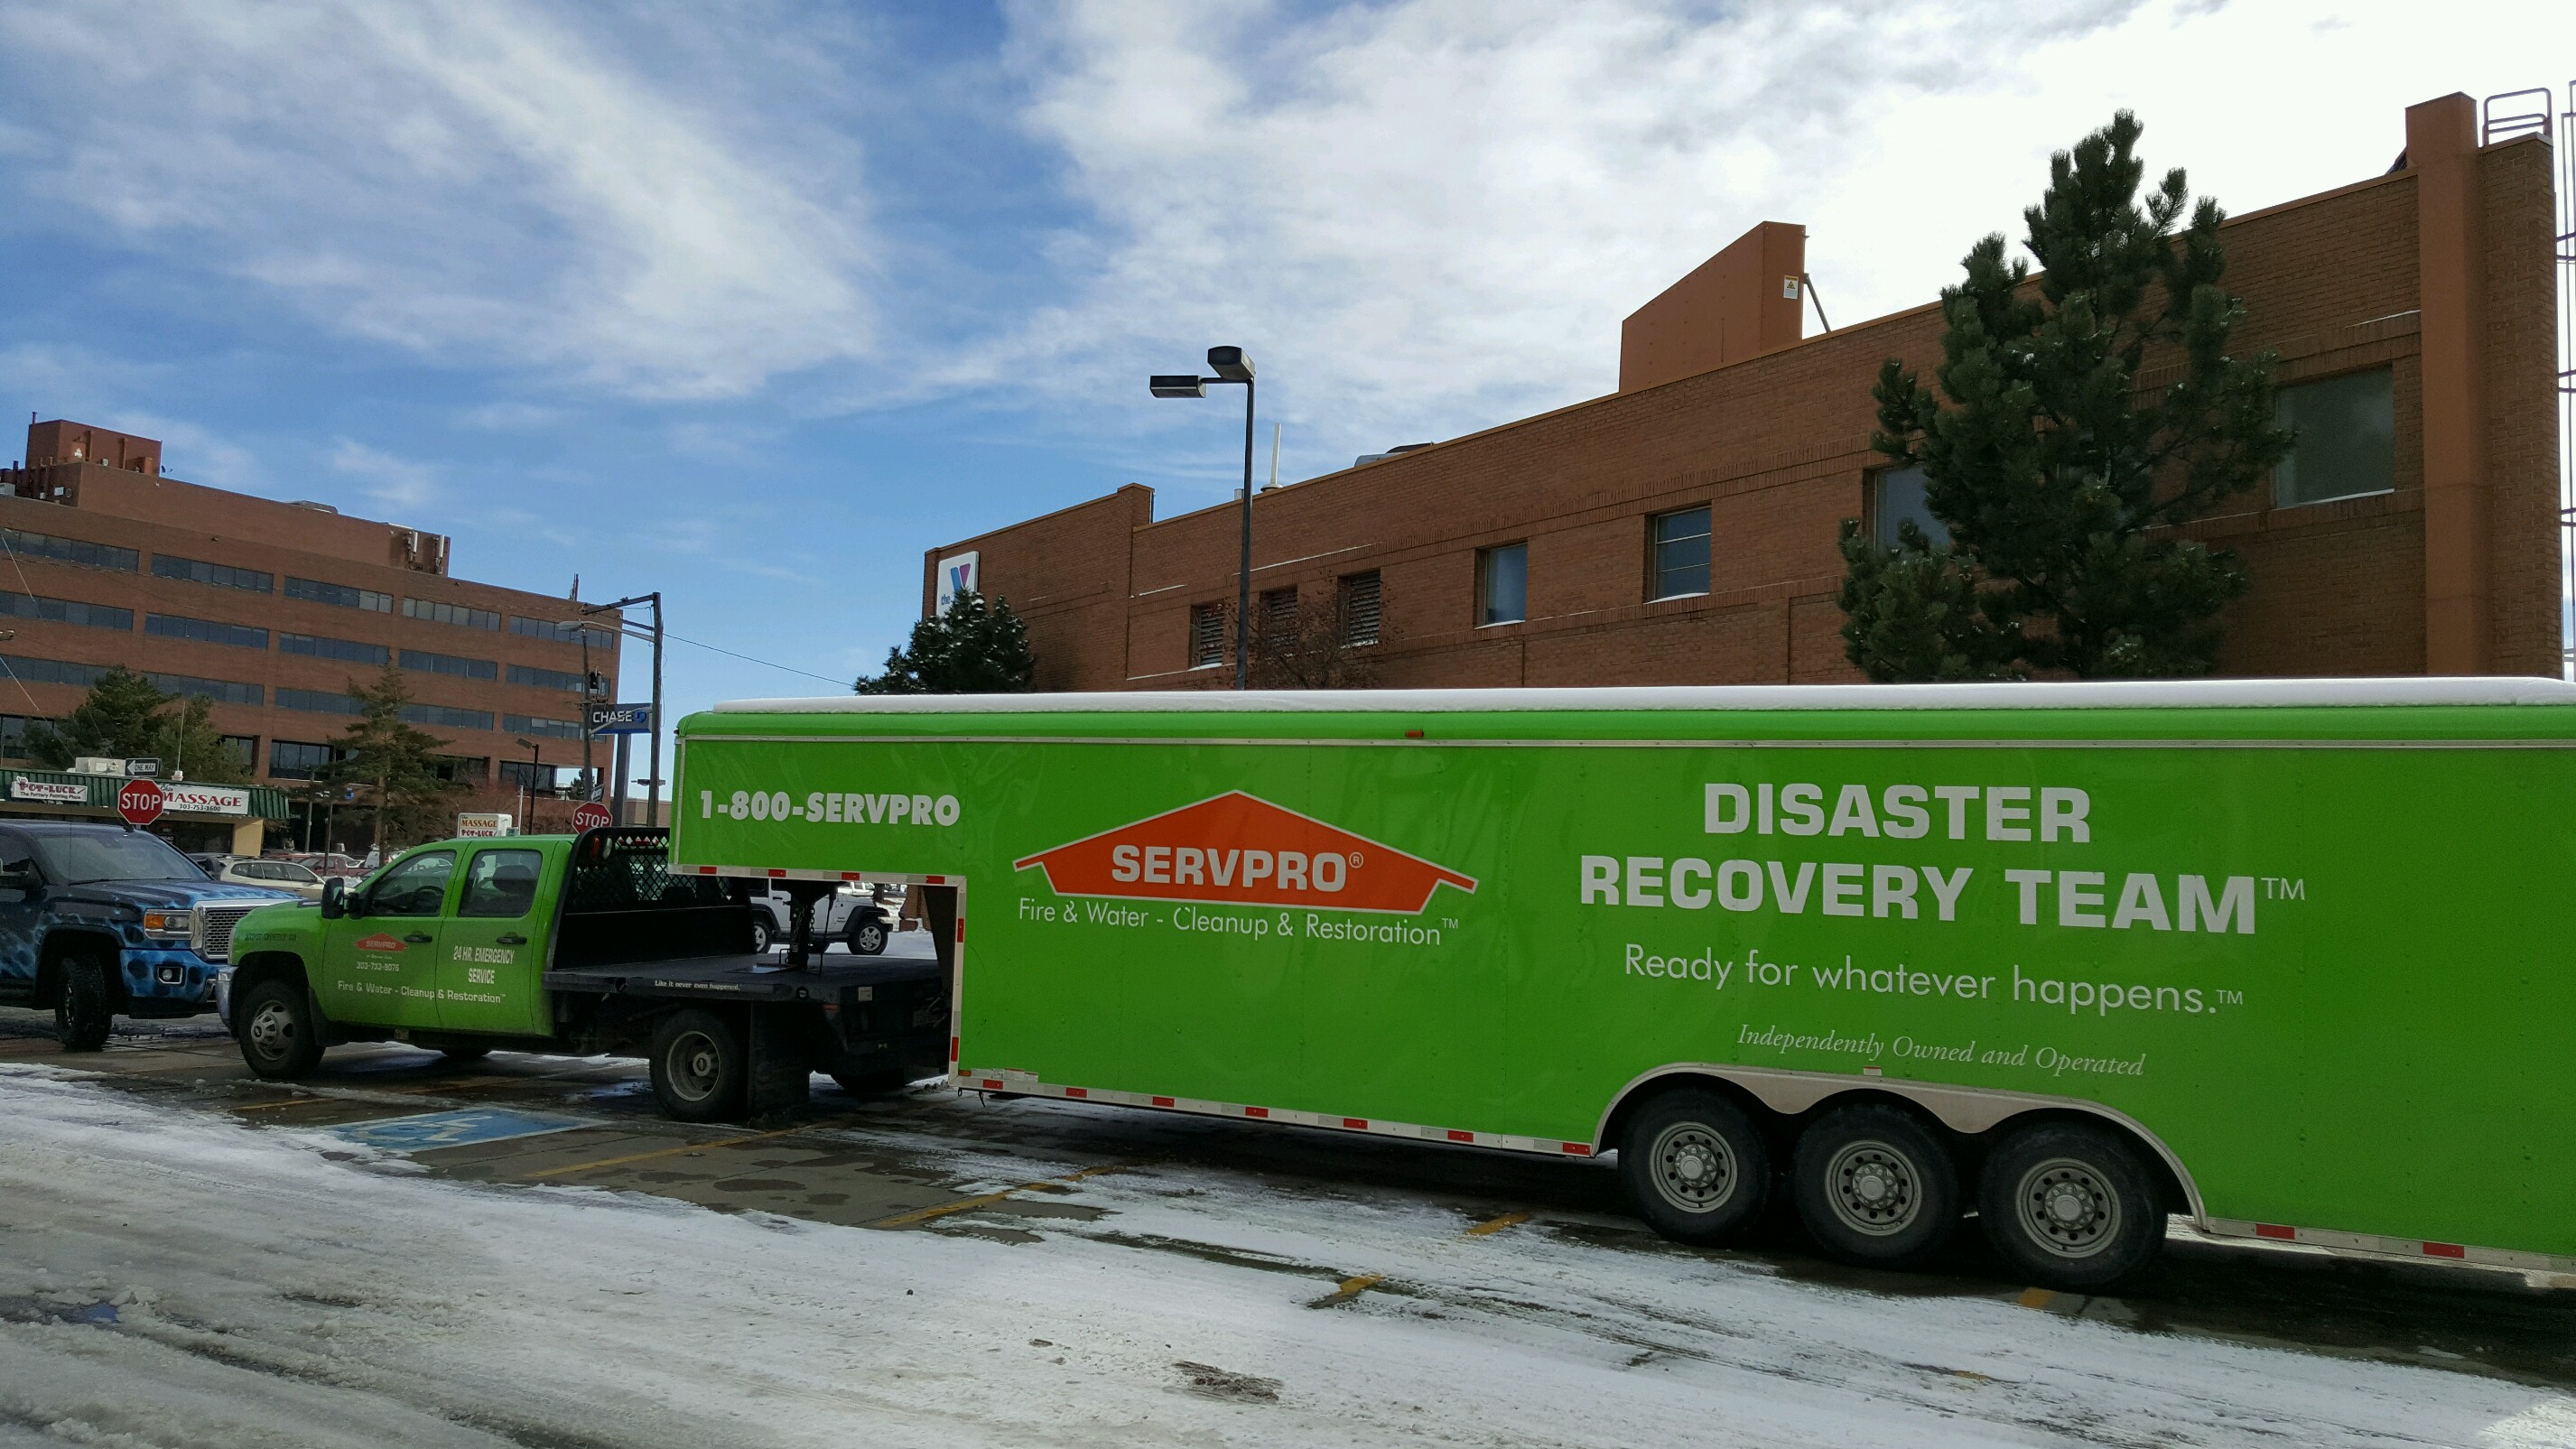 Our Disaster Recovery team is quick to respond to any size loss.